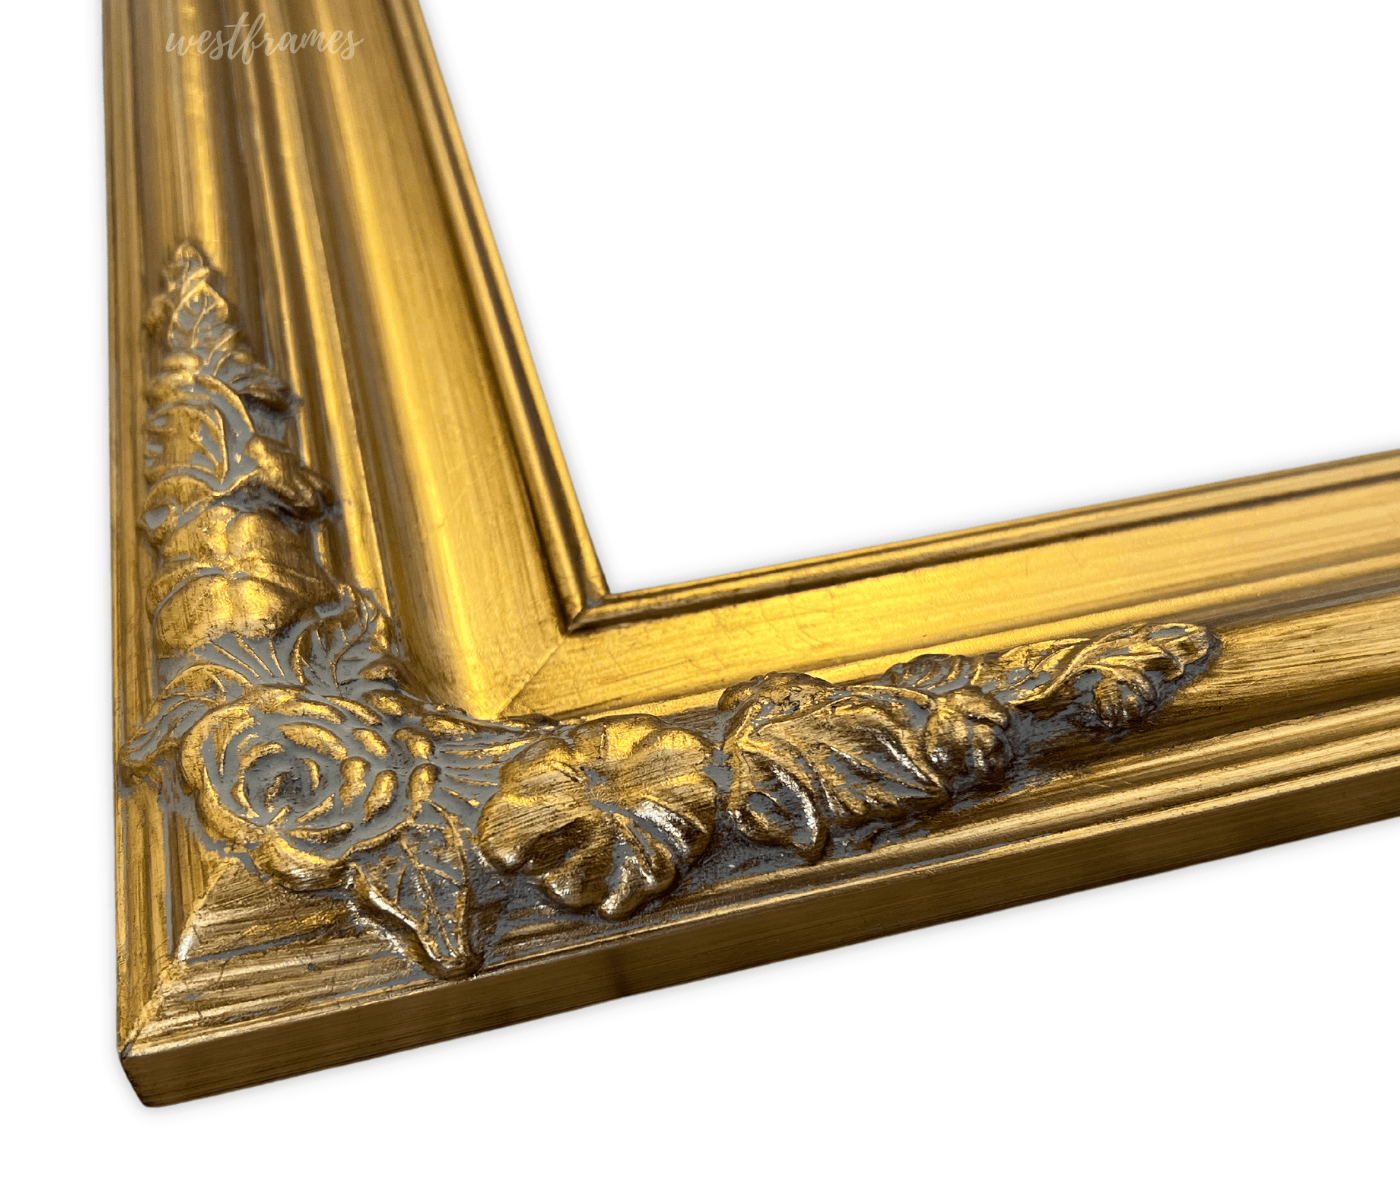 Parisienne French Ornate Embossed Wood Picture Frame Antique Gold